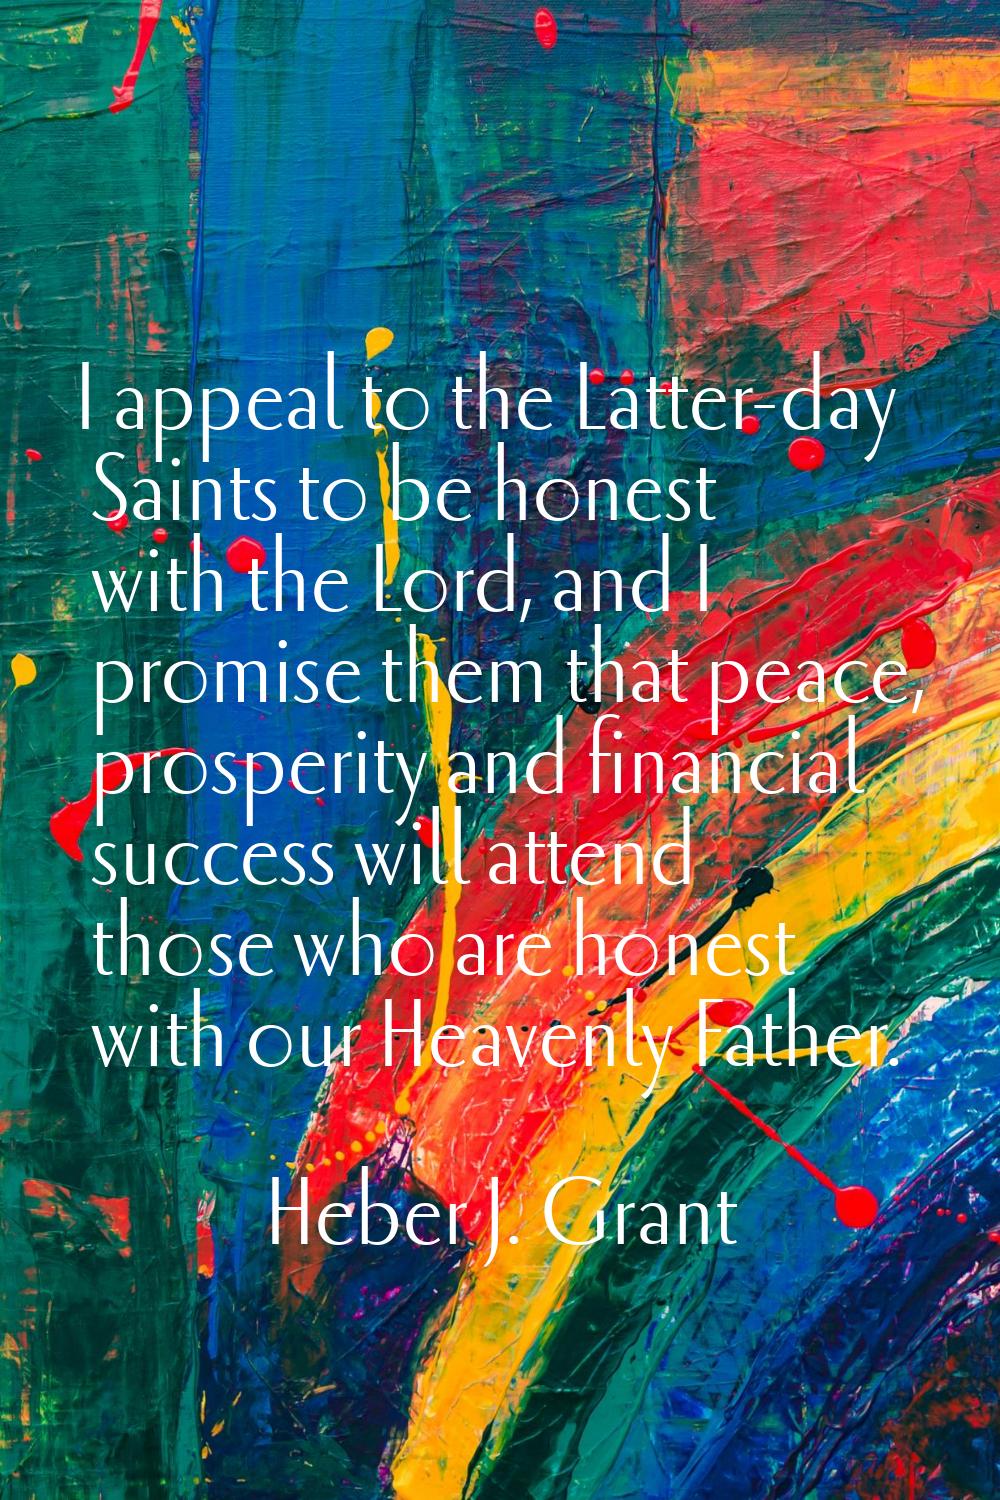 I appeal to the Latter-day Saints to be honest with the Lord, and I promise them that peace, prospe